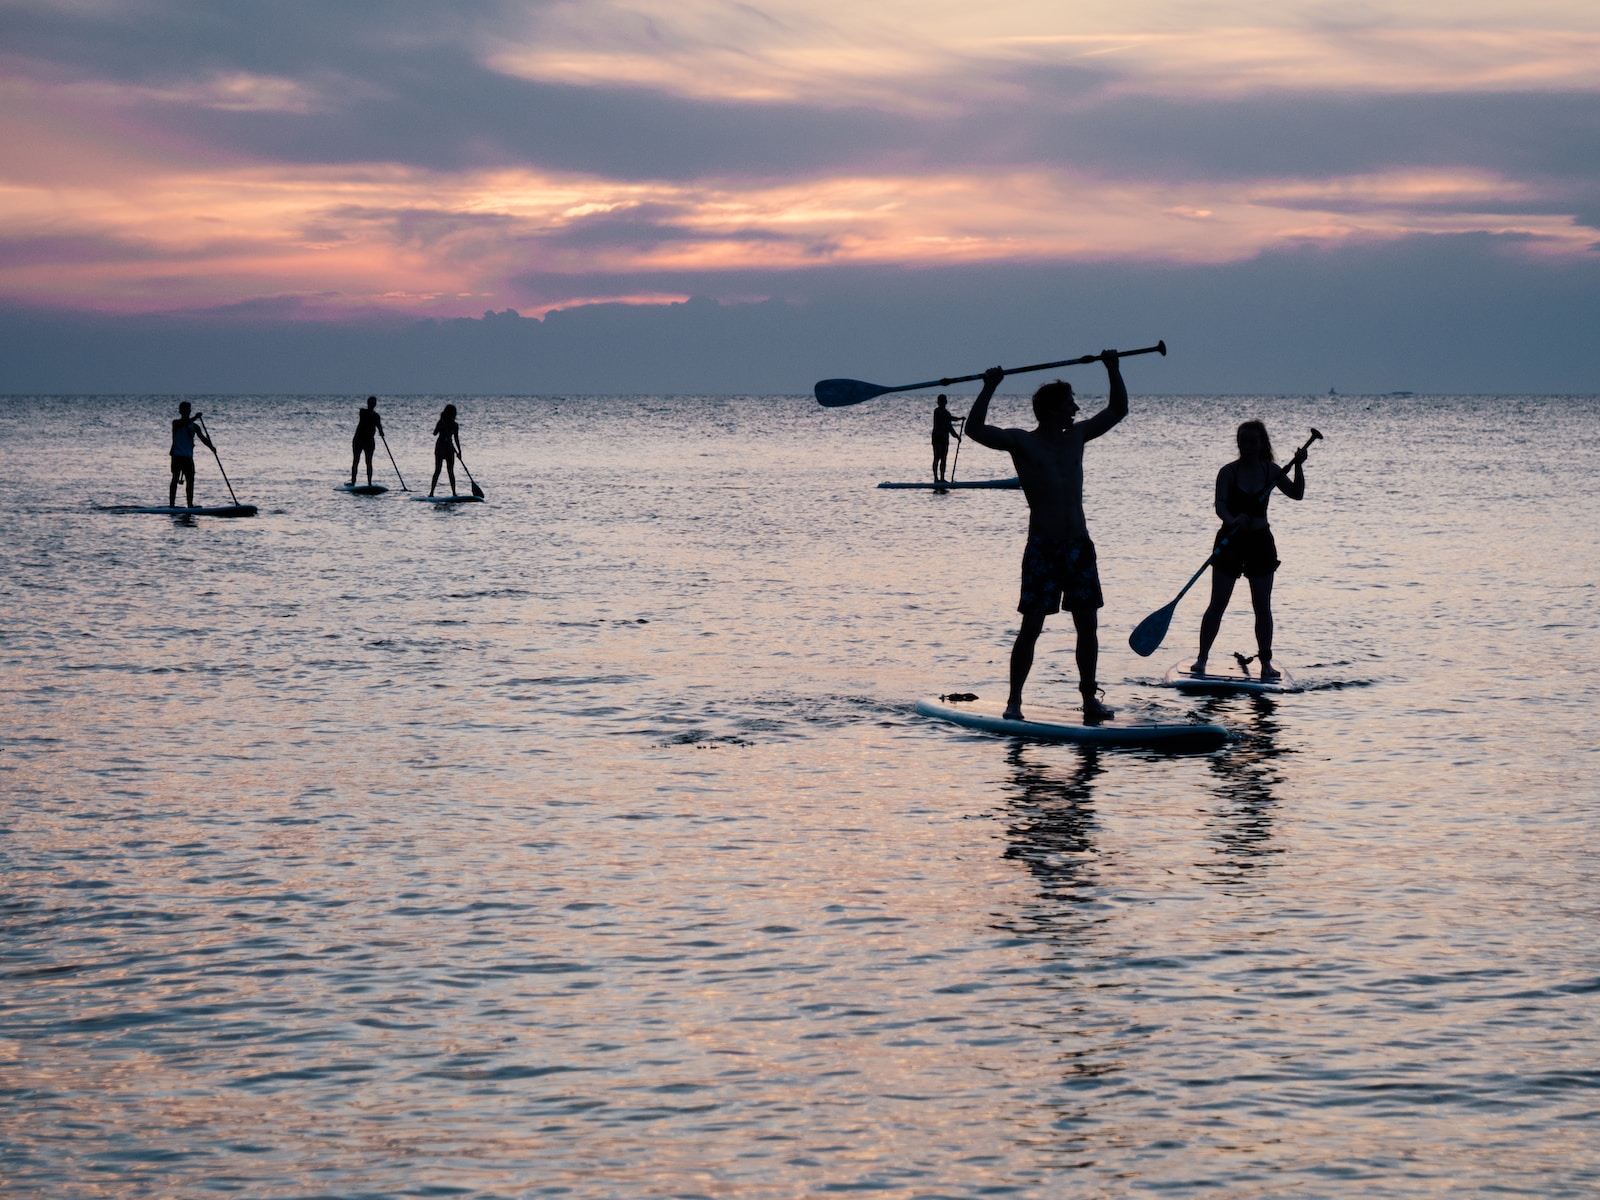 SUP Boards, stand up paddle, stand up paddle boards, SUP gave, unge, eksamen, studentergave